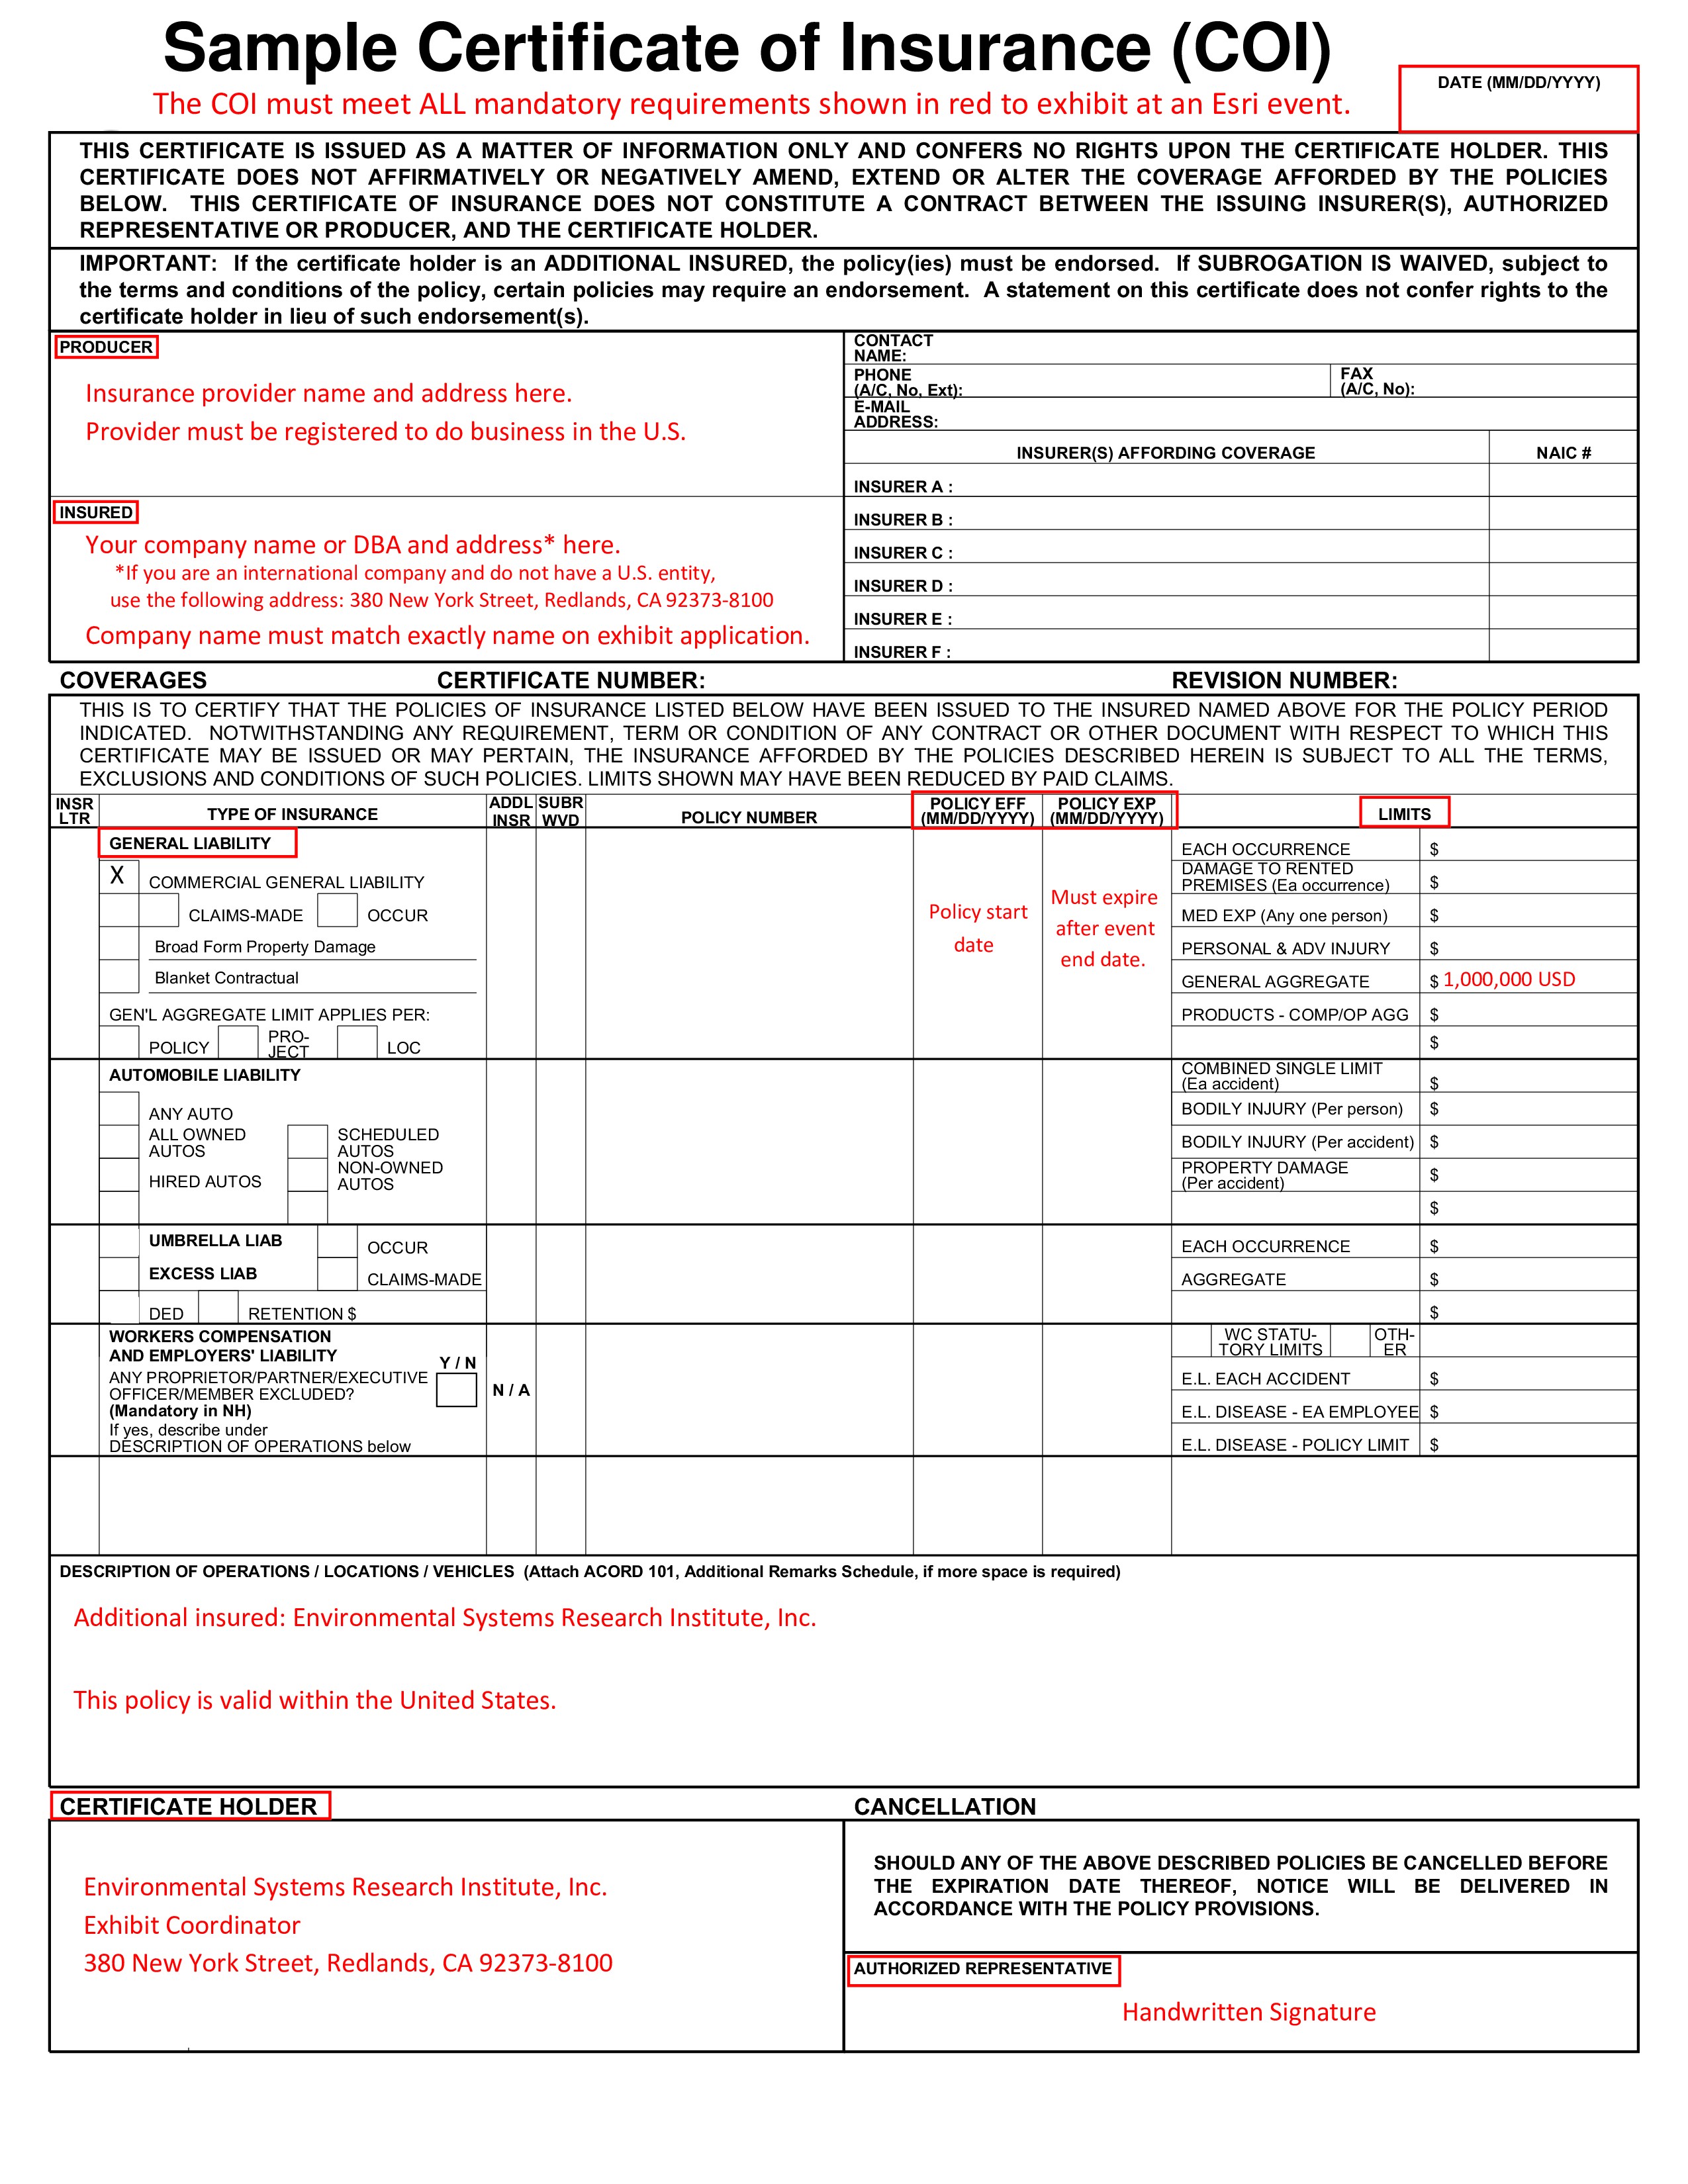 Free Sample Certificate Of Insurance Coi Templates At Document